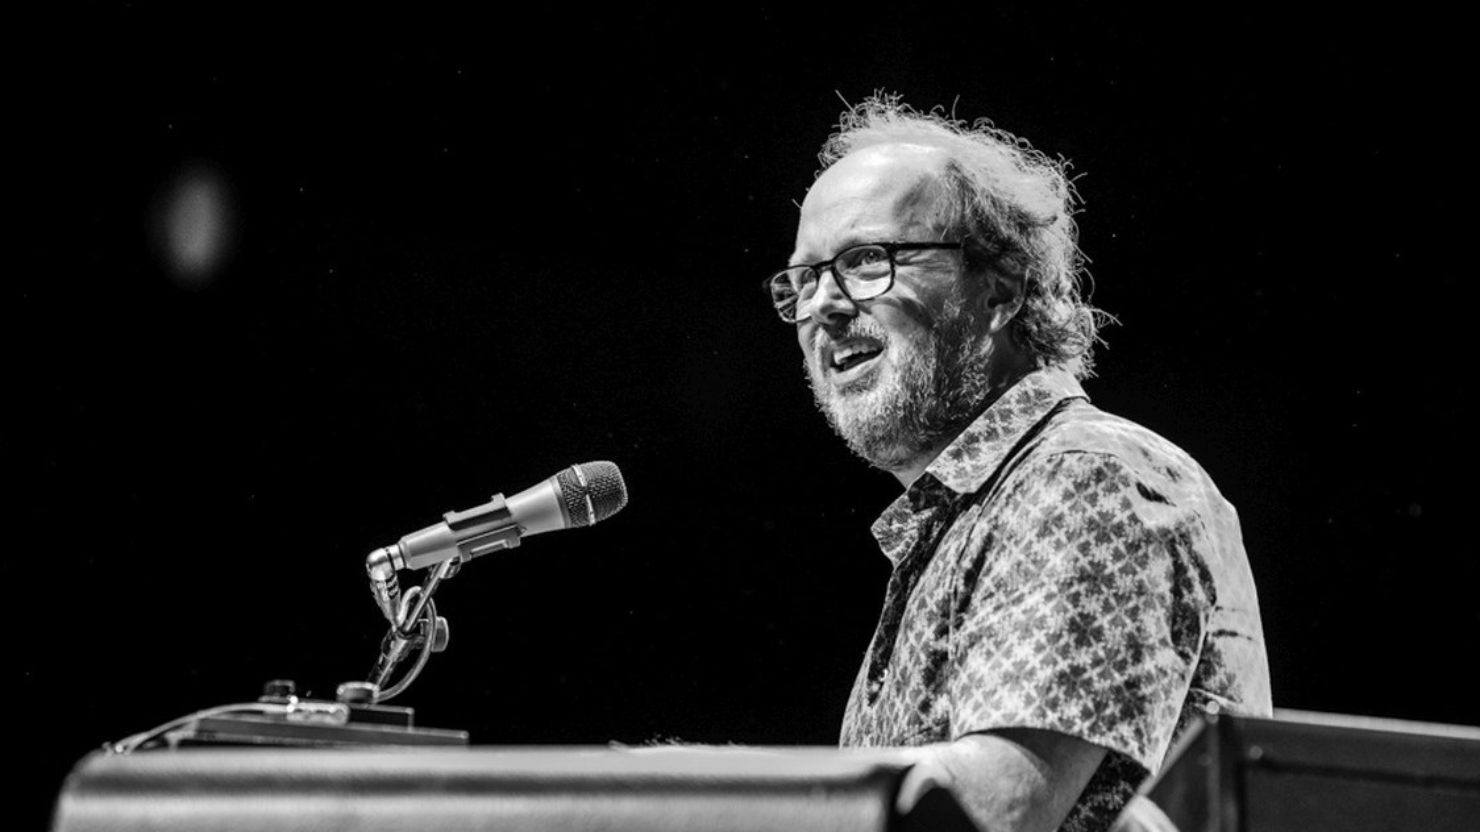 Phish’s Page McConnell Drops  Ambient Electronic Solo Album, ‘Maybe We’re the Visitors’